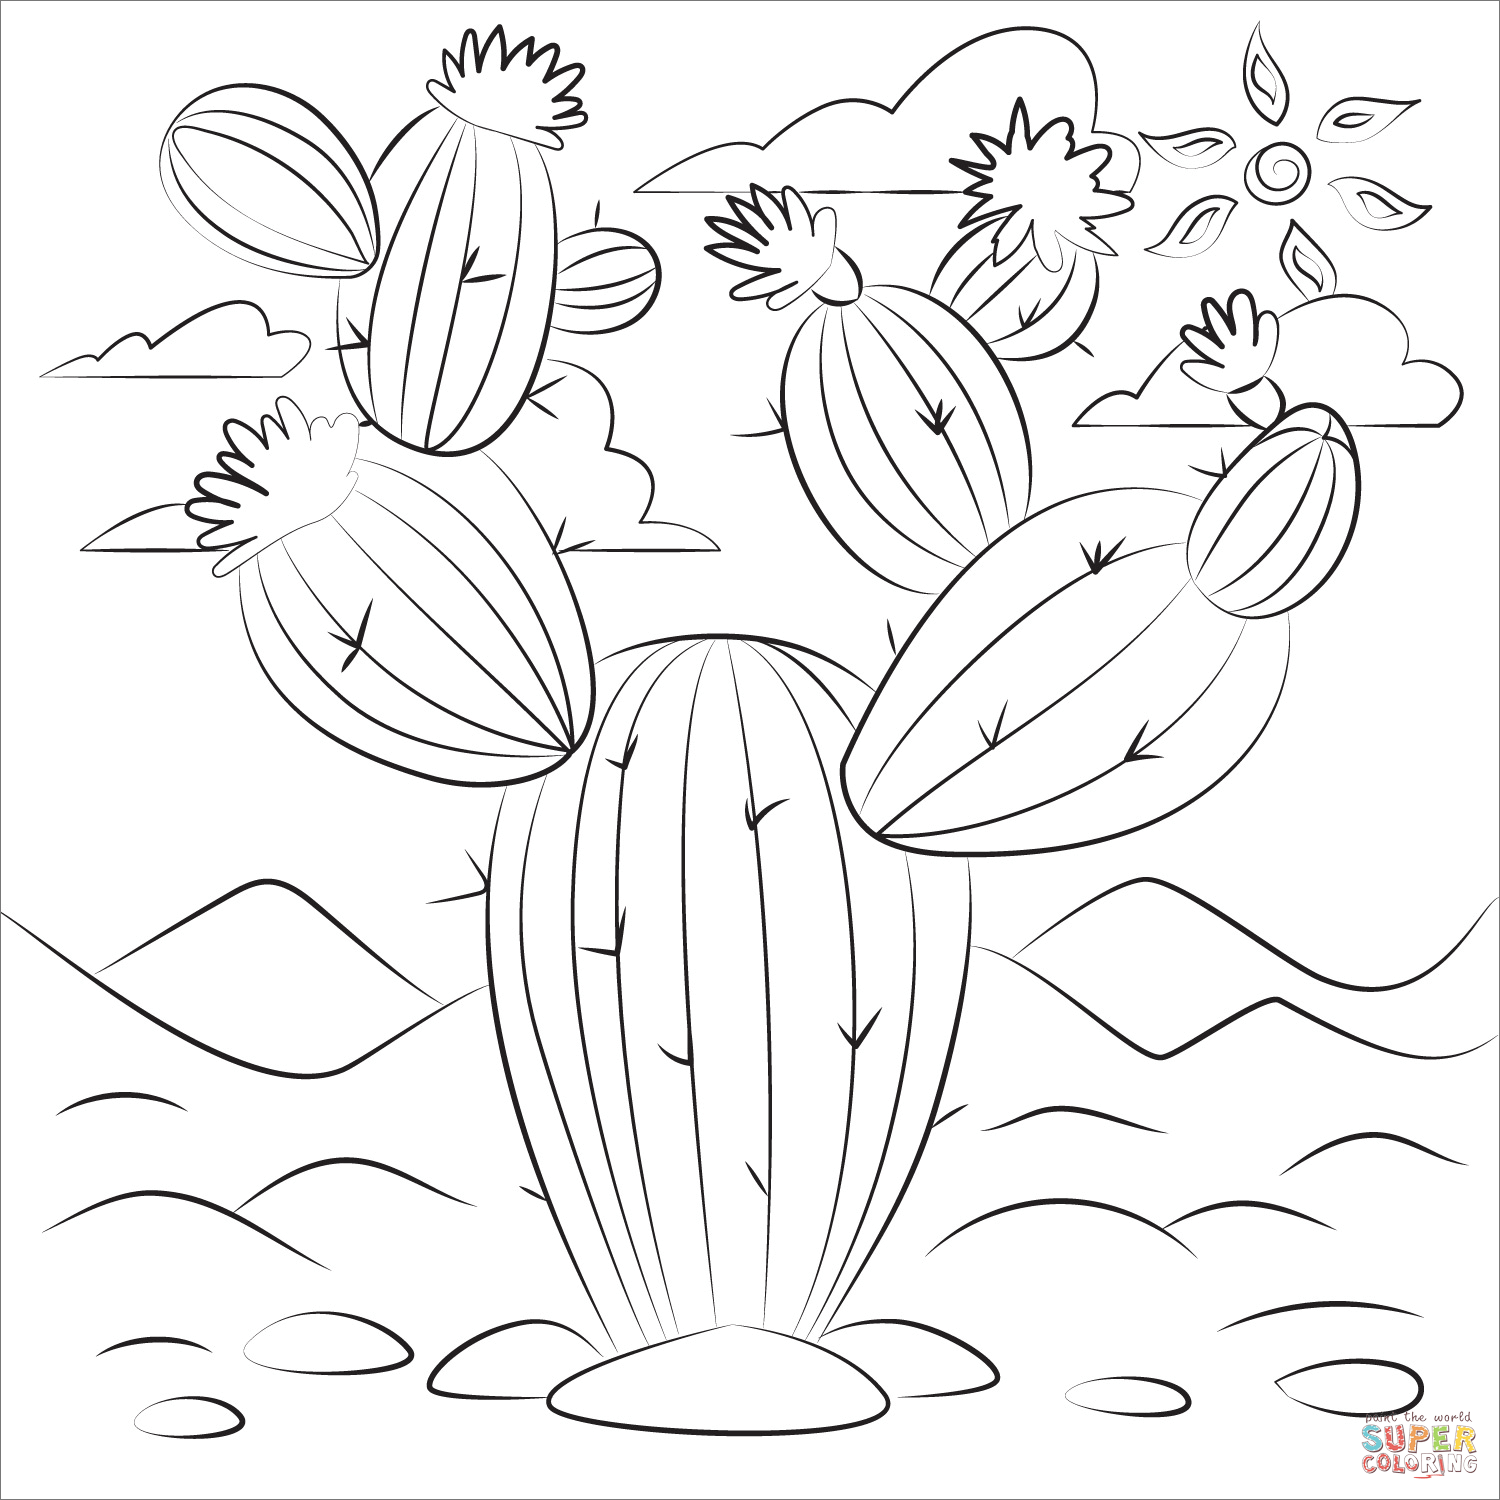 Cactus Coloring Page